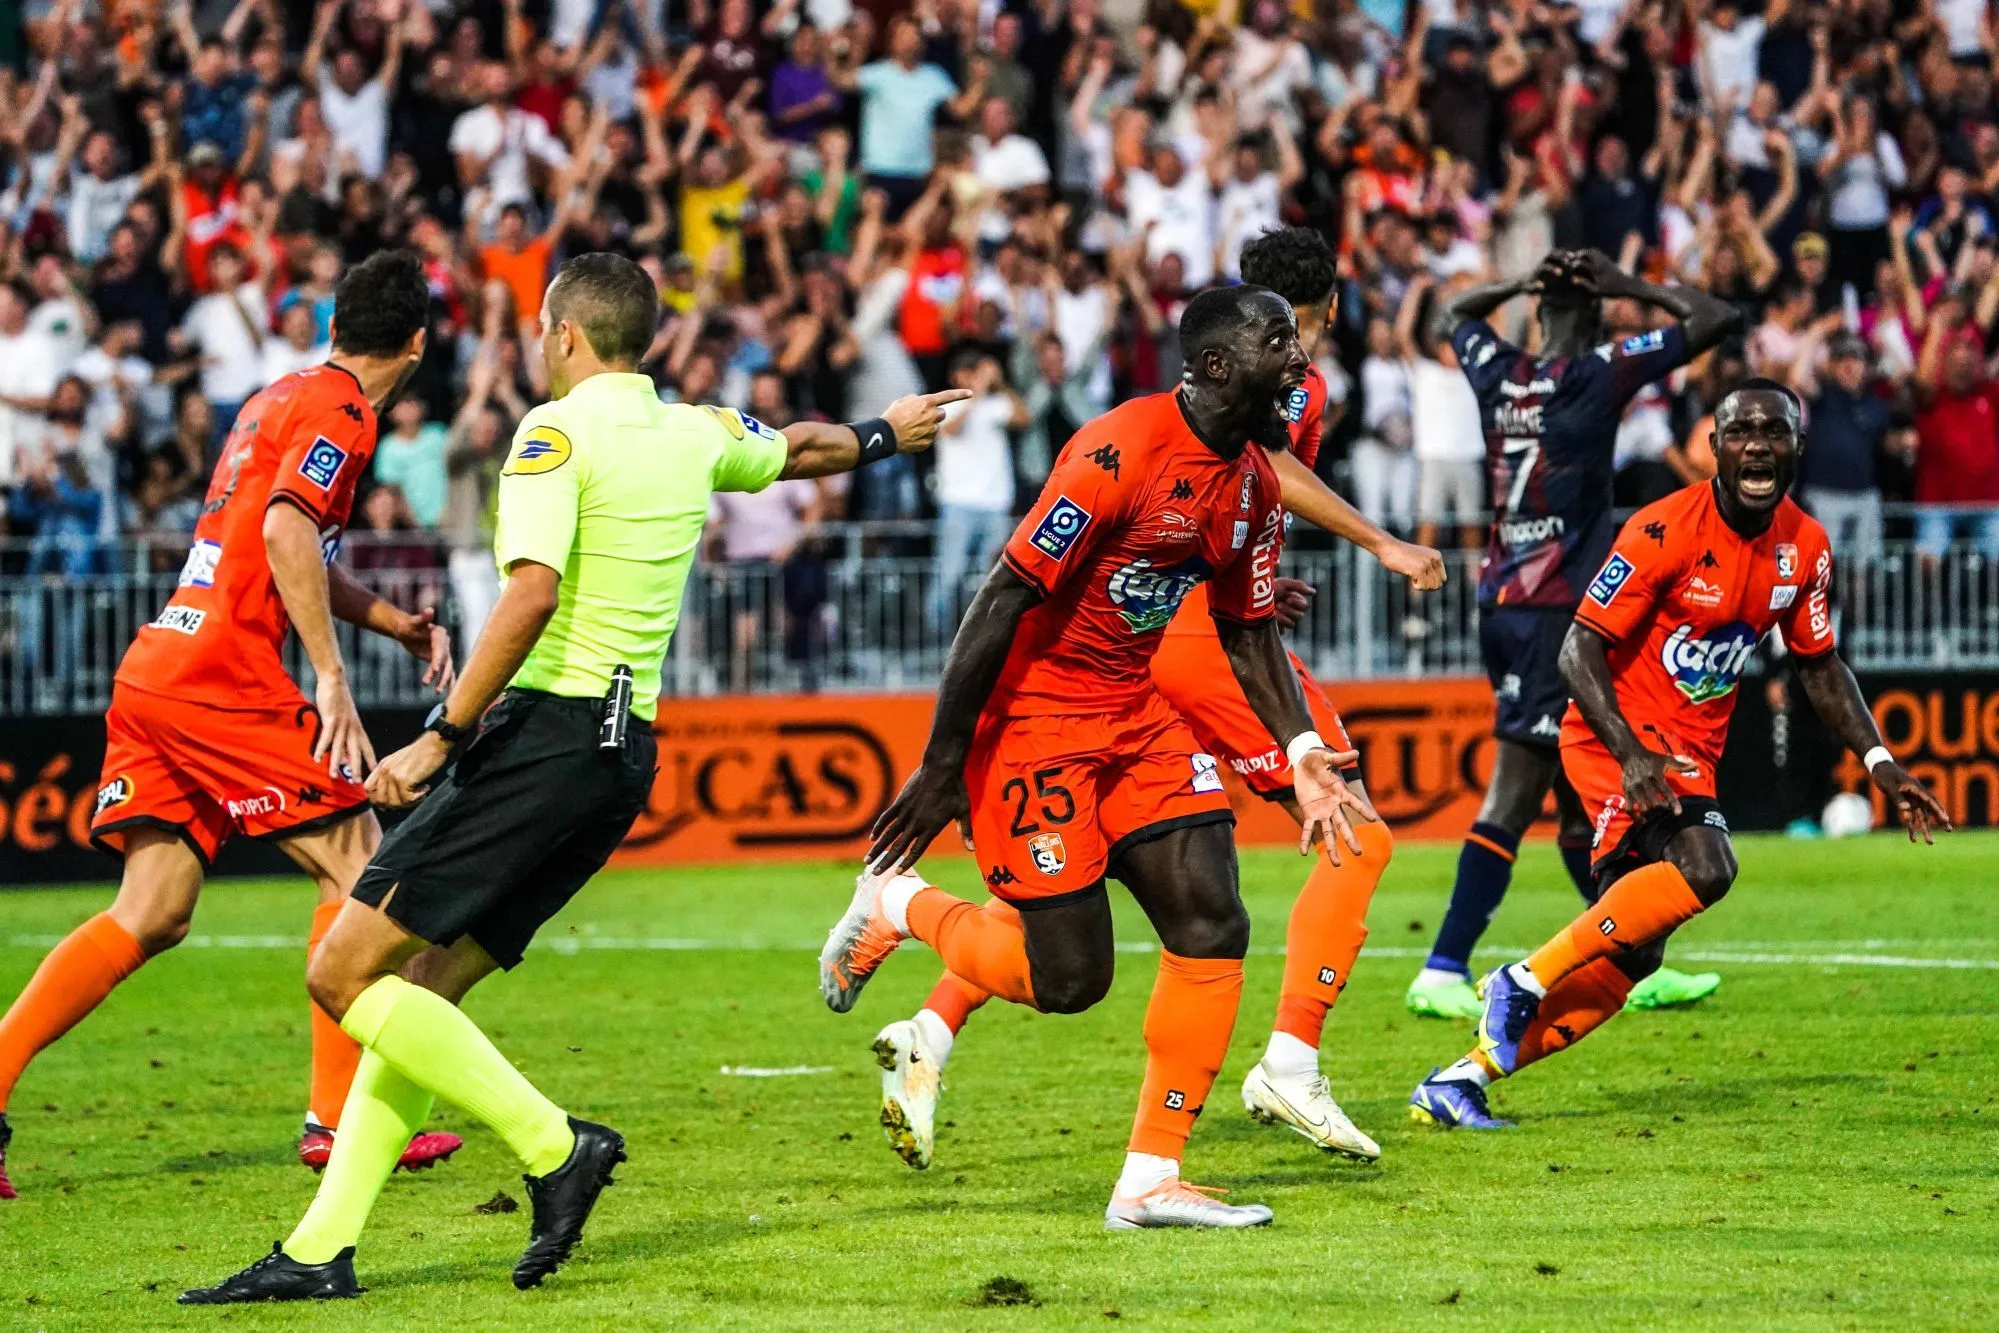 Edson SEIDOU of Laval celebrates after the goal of Djibril DIAW of Laval during the Ligue 2 BKT match between Stade Lavallois and FC Metz at Stade Francis-Le Basser on August 20, 2022 in Laval, France. (Photo by Eddy Lesmaistre/Icon Sport)